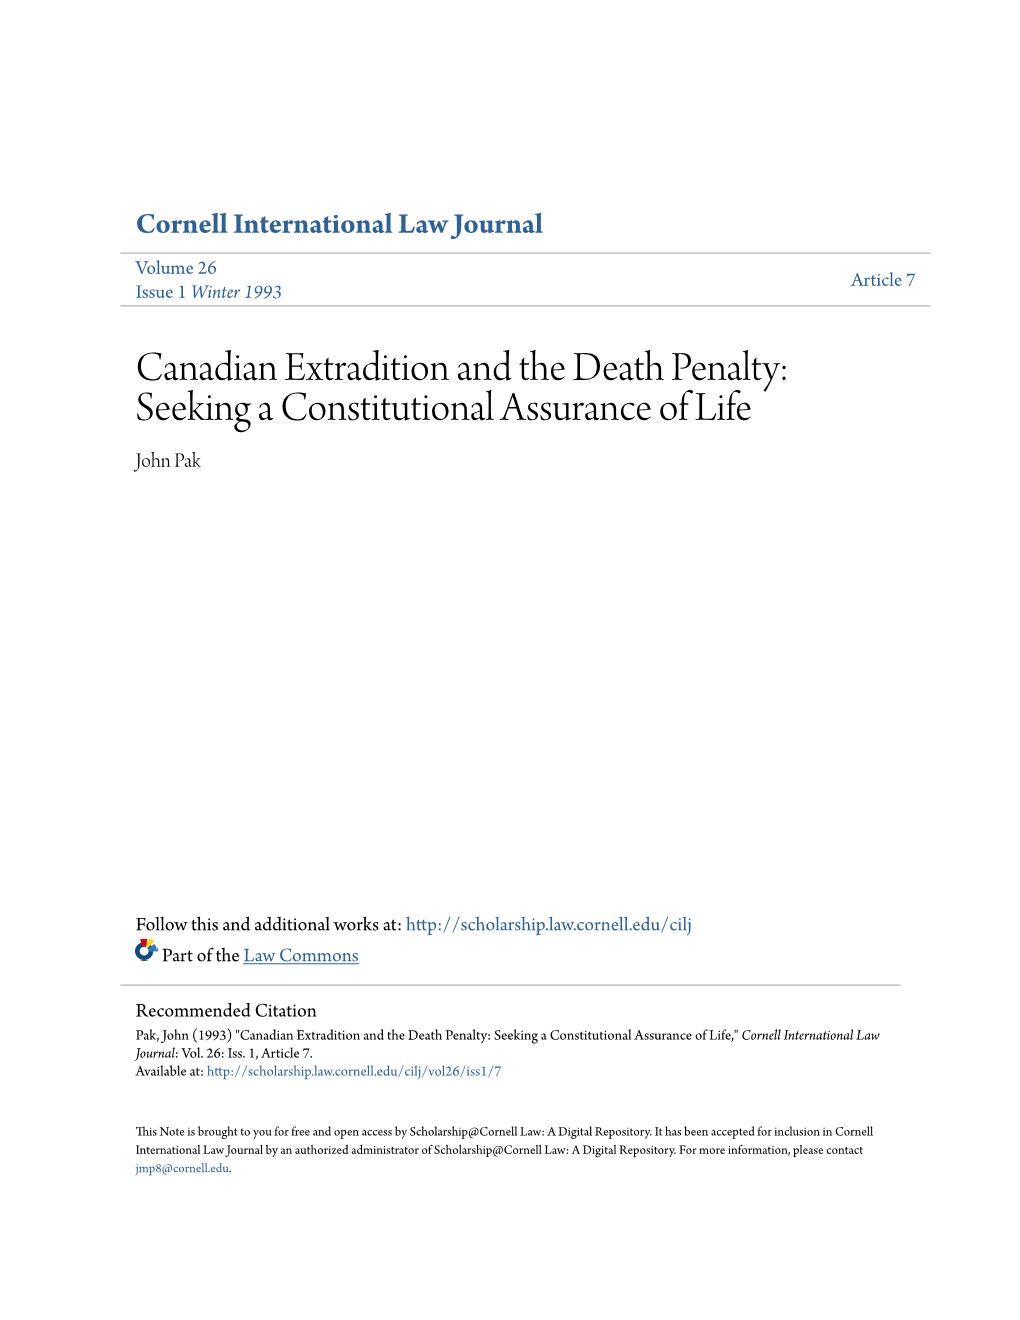 Canadian Extradition and the Death Penalty: Seeking a Constitutional Assurance of Life John Pak